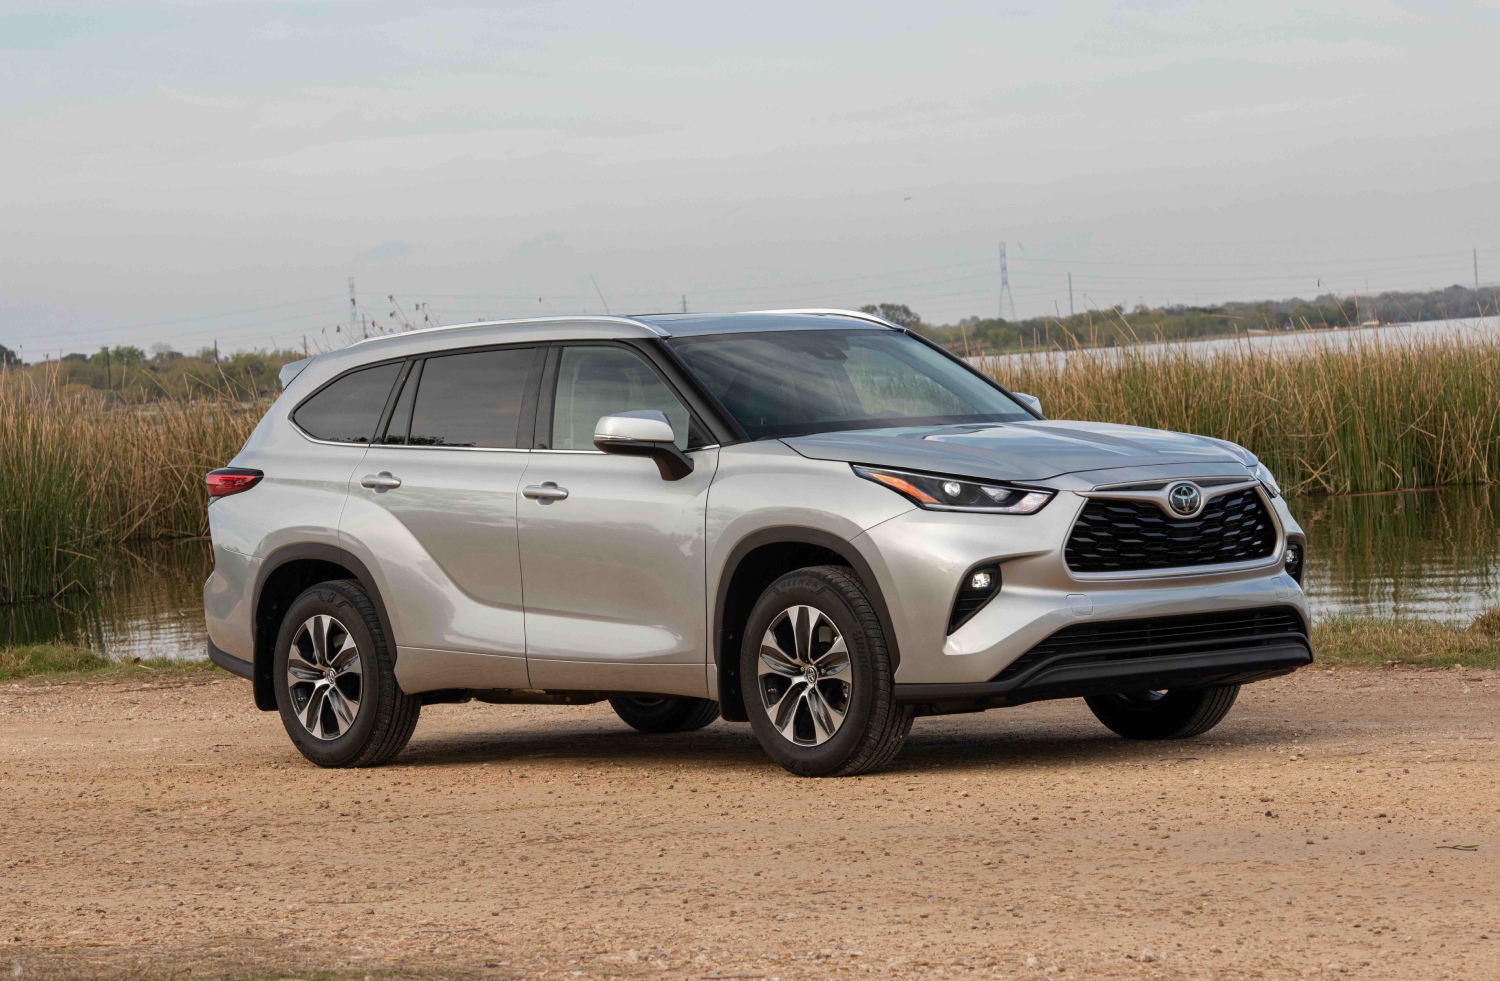 The safest midsize SUVs for 2022 include this Toyota Highlander